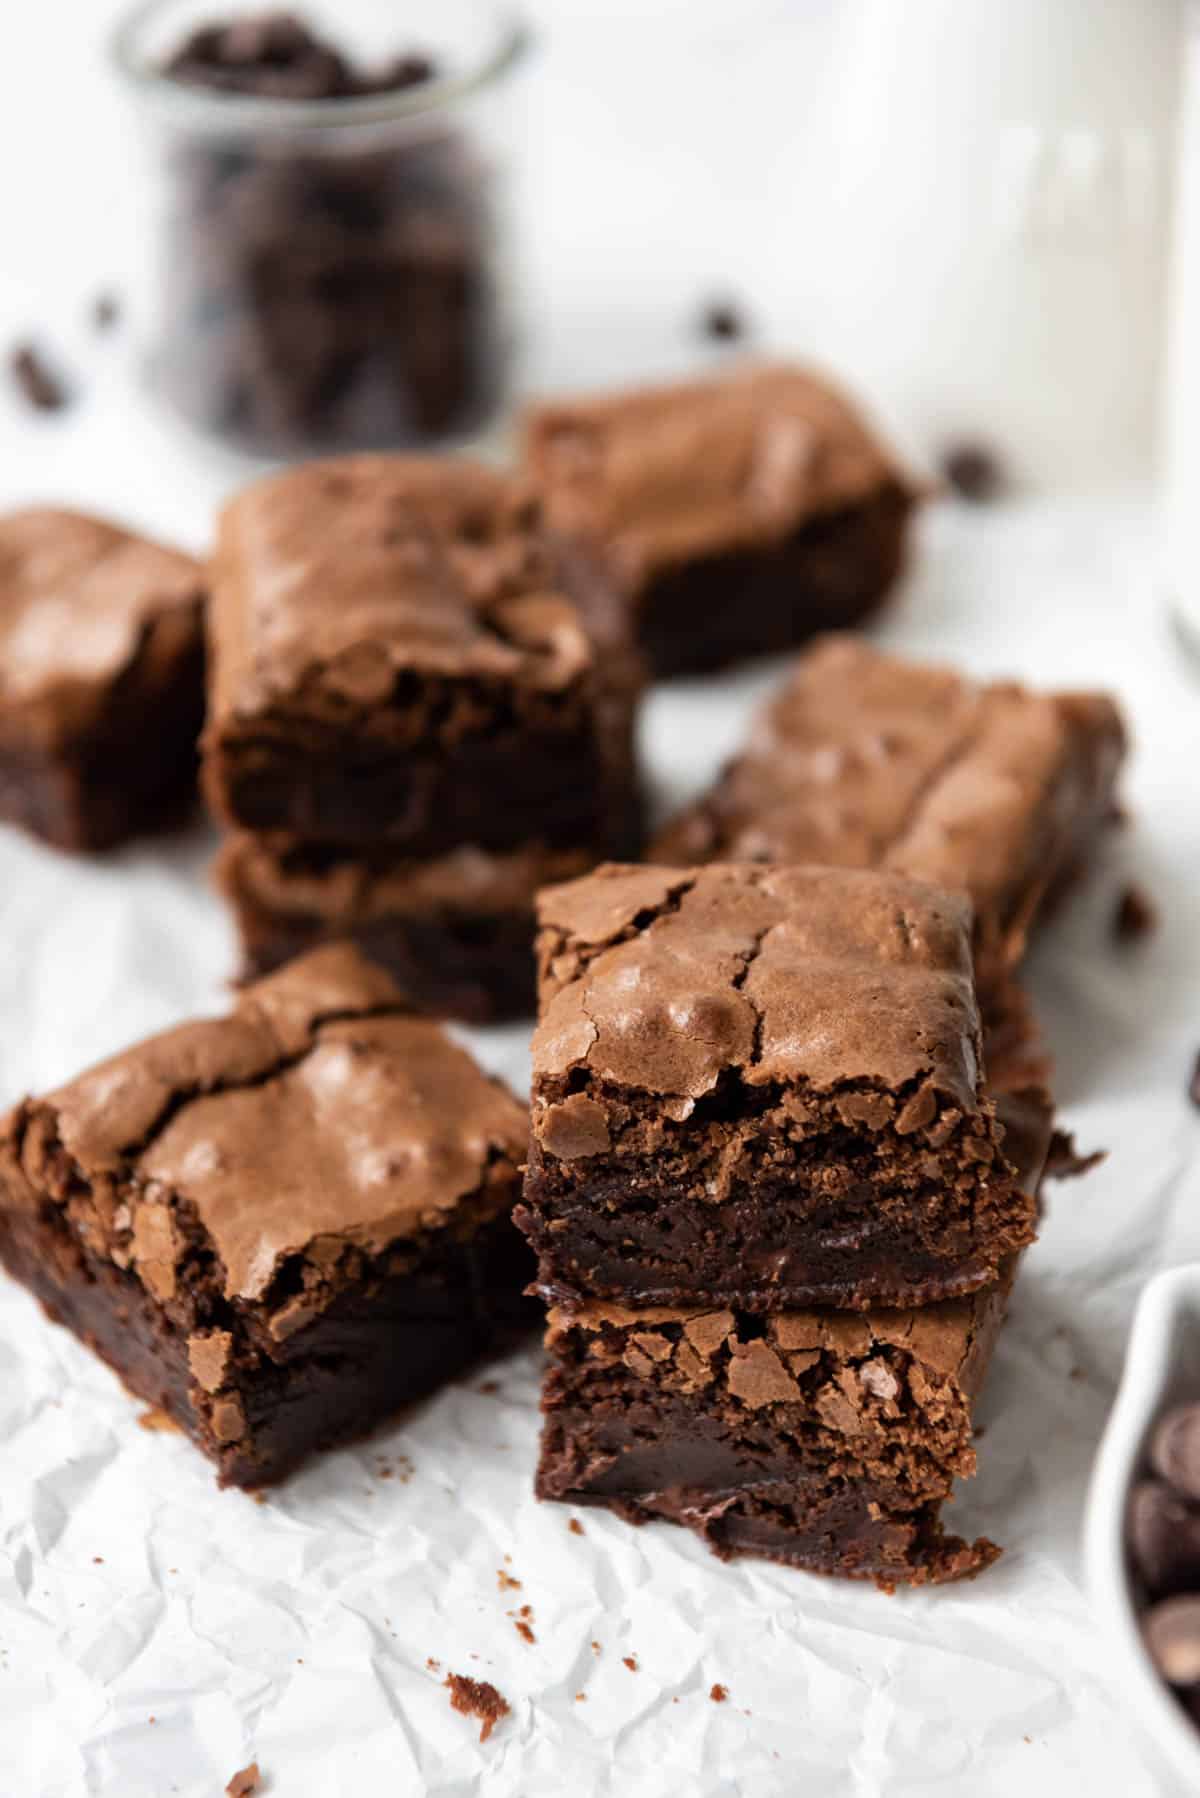 Homemade brownie squares made in a small batch arranged on white parchment paper.